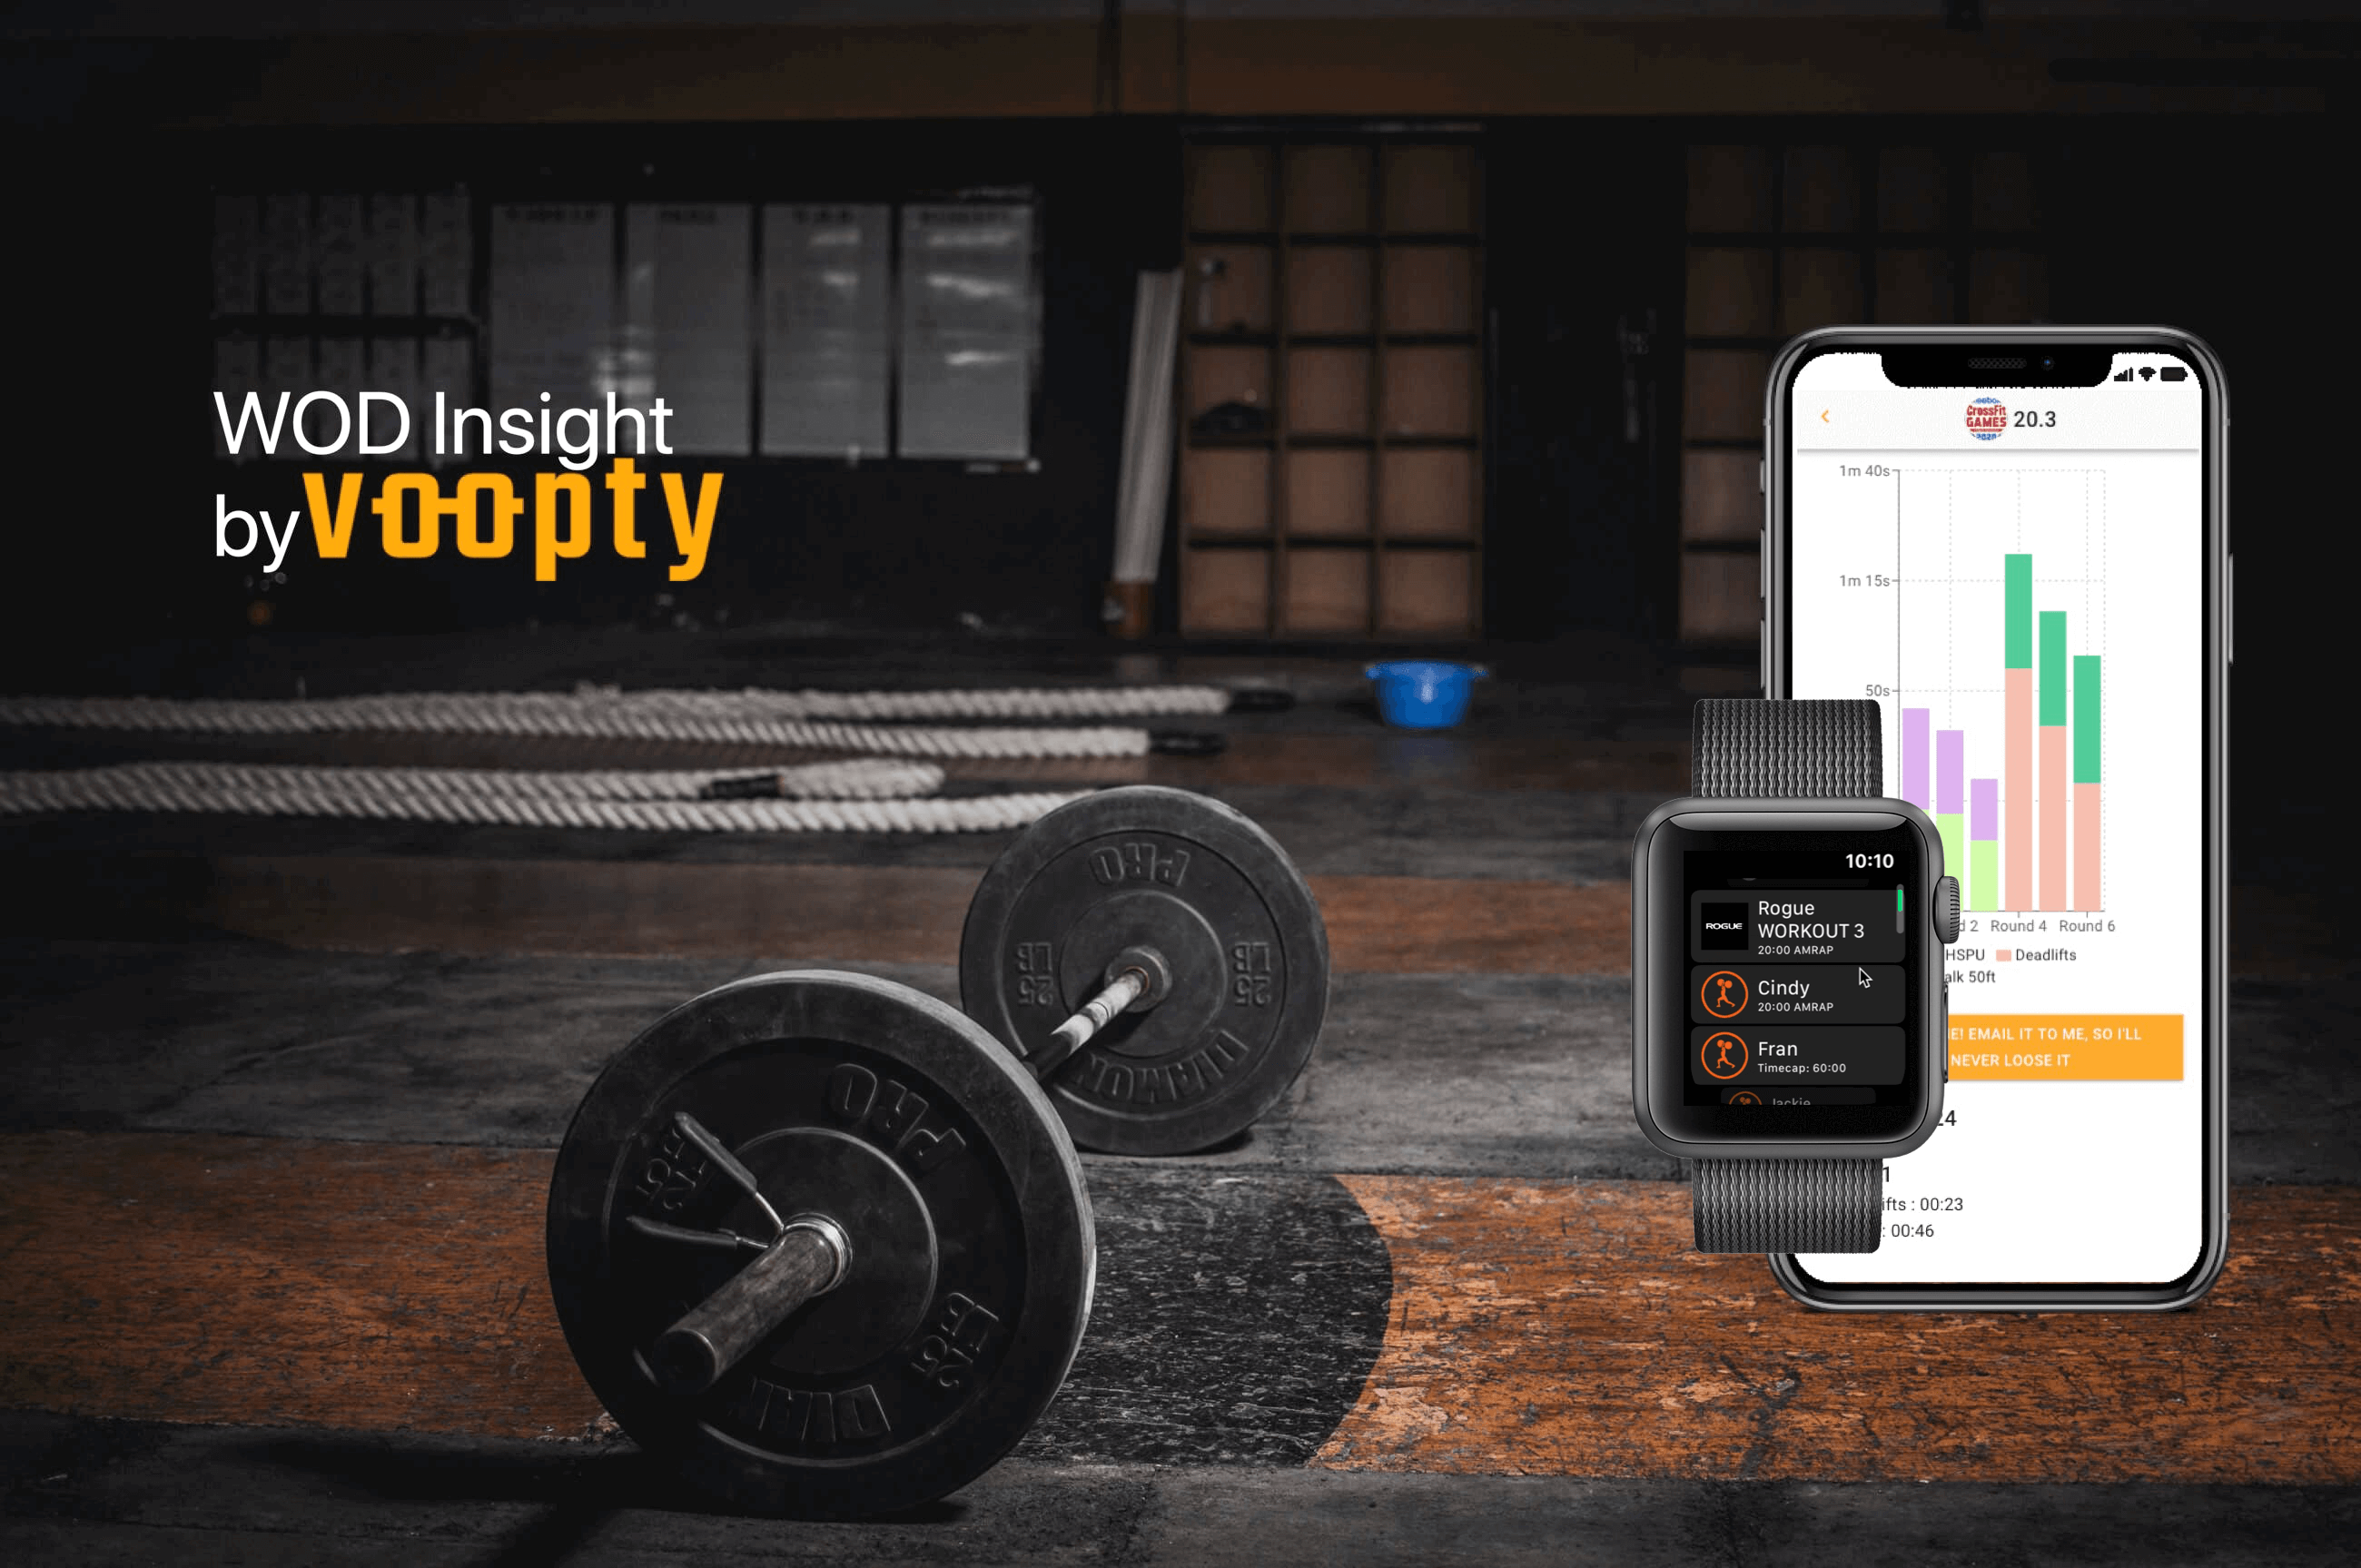 apple watch 4 and crossfit